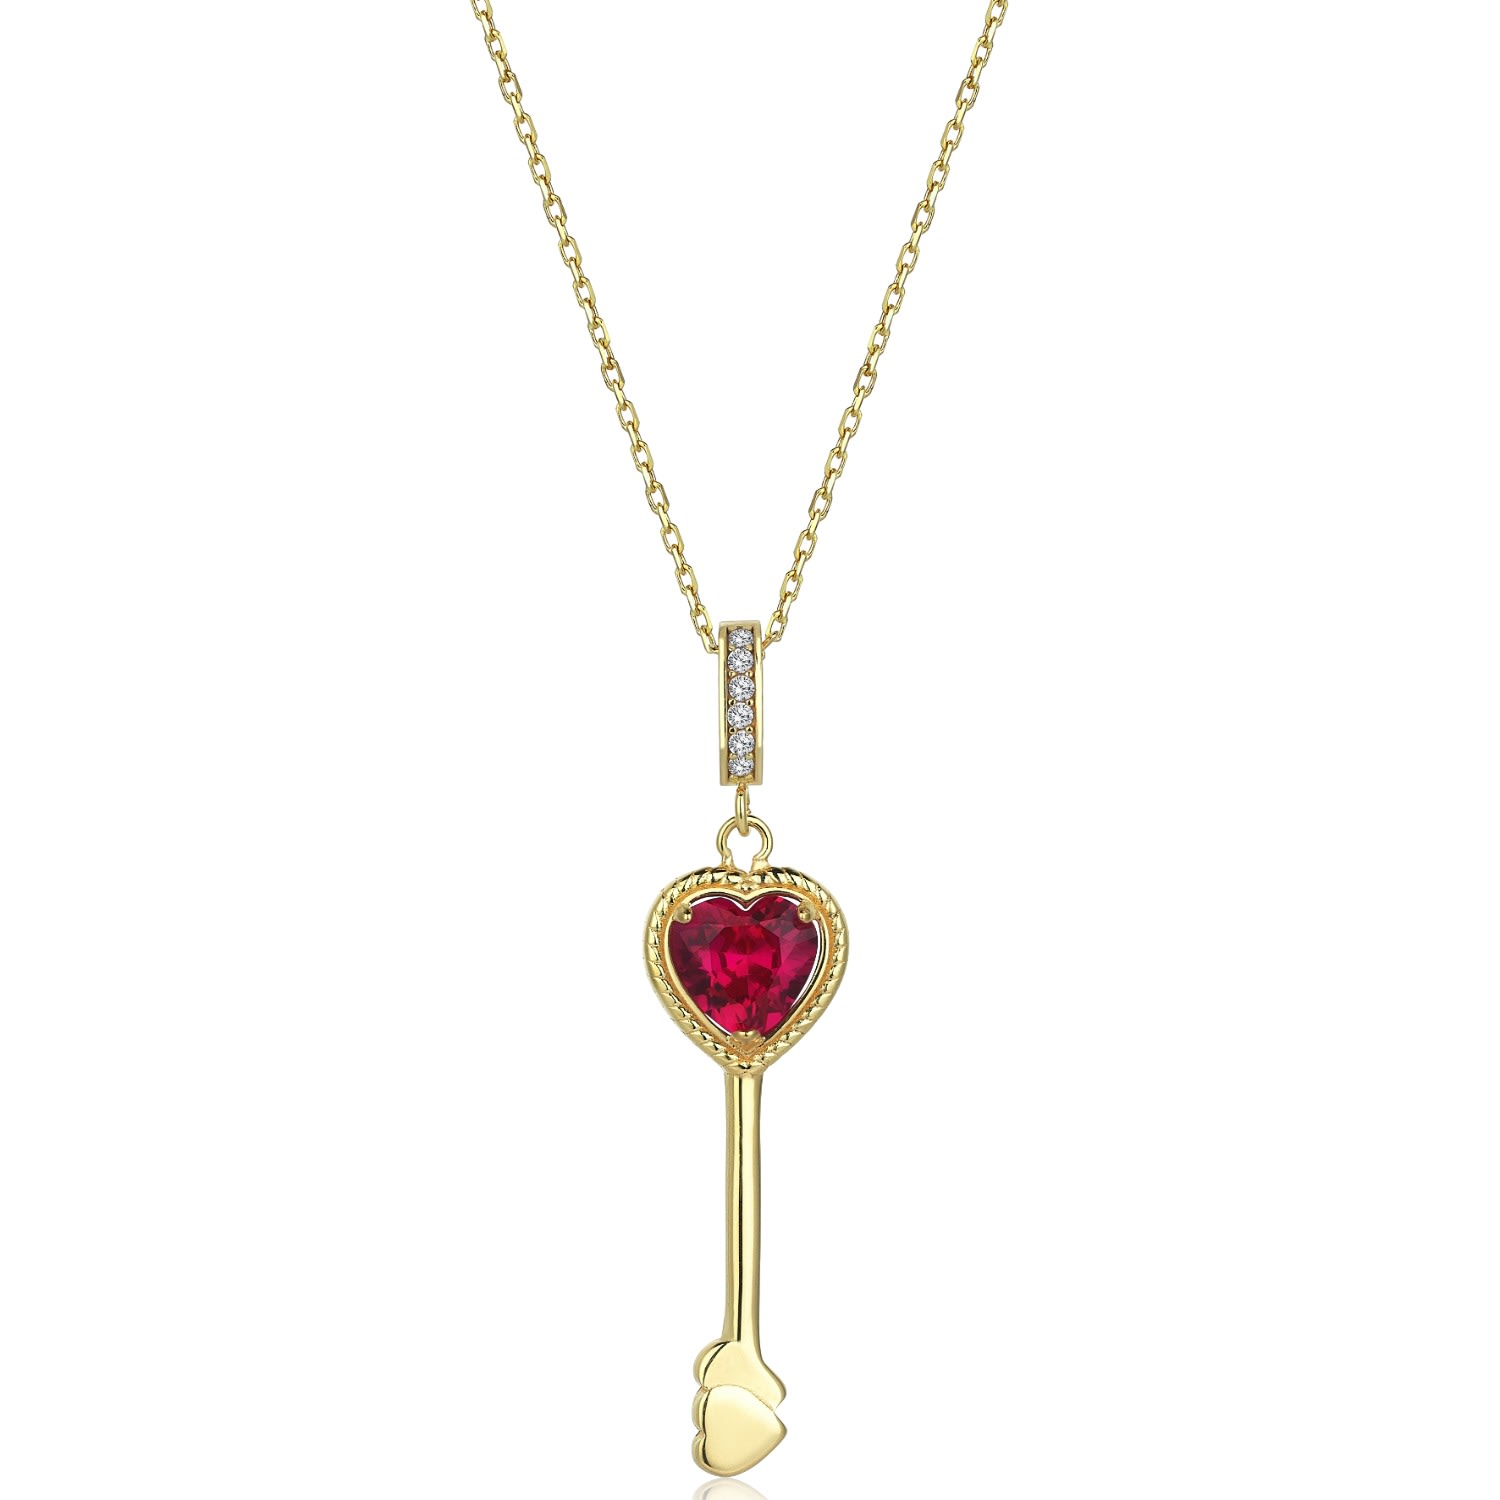 Odda75 Women's Odalique Charm Necklace In Sterling Silver With Gold Plated Red